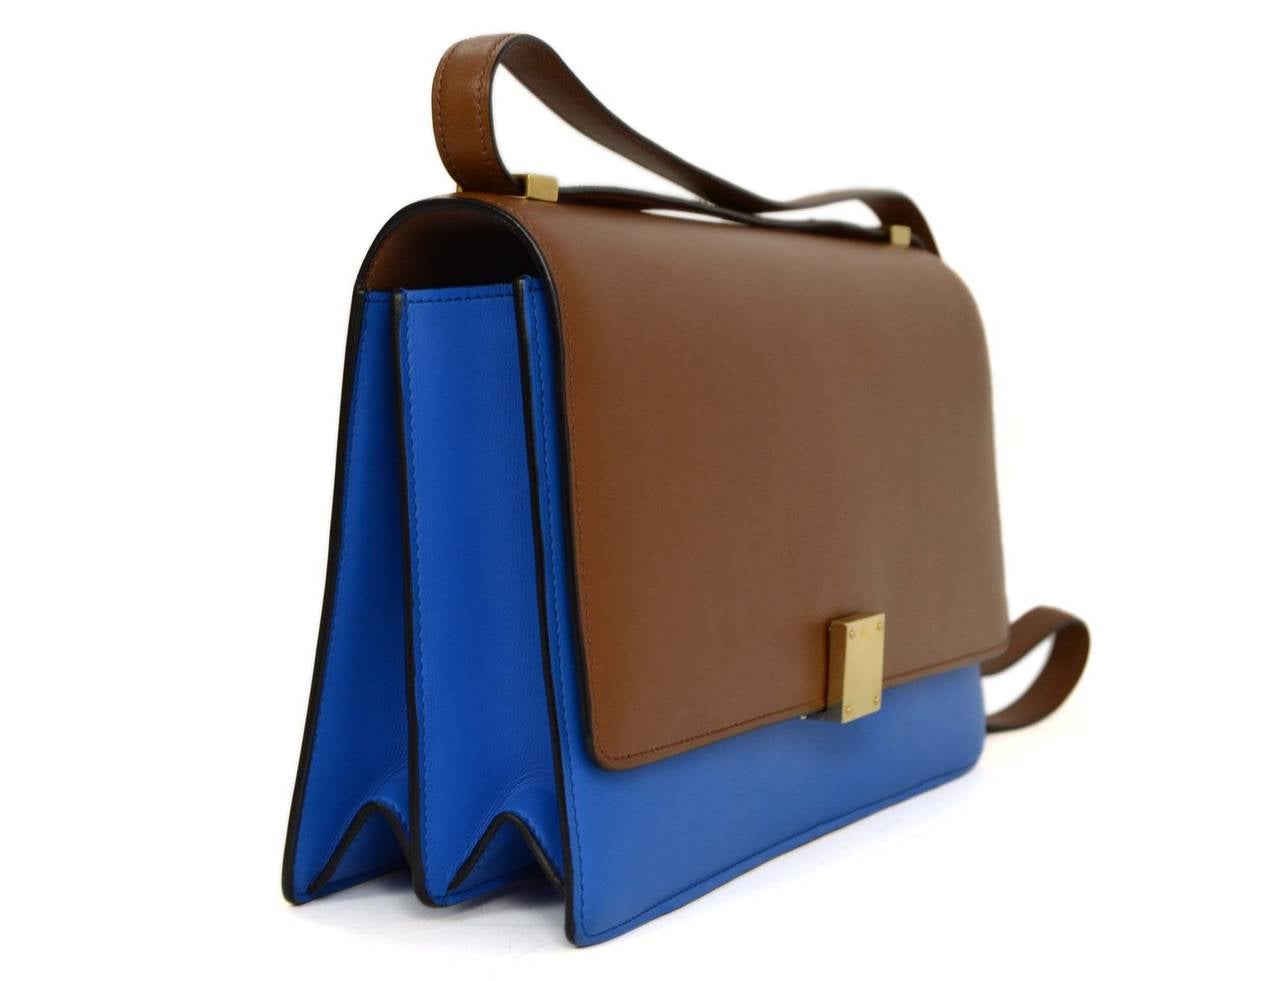 Celine Two-Tone Calfskin Medium Case Flap Bag
Features shoulder strap that can adjust from double to single to switch from shoulder bag to crossbody
Made in: Italy
Color: Cobalt, brown and goldtone
Hardware: Goldtone
Materials: Calfskin and